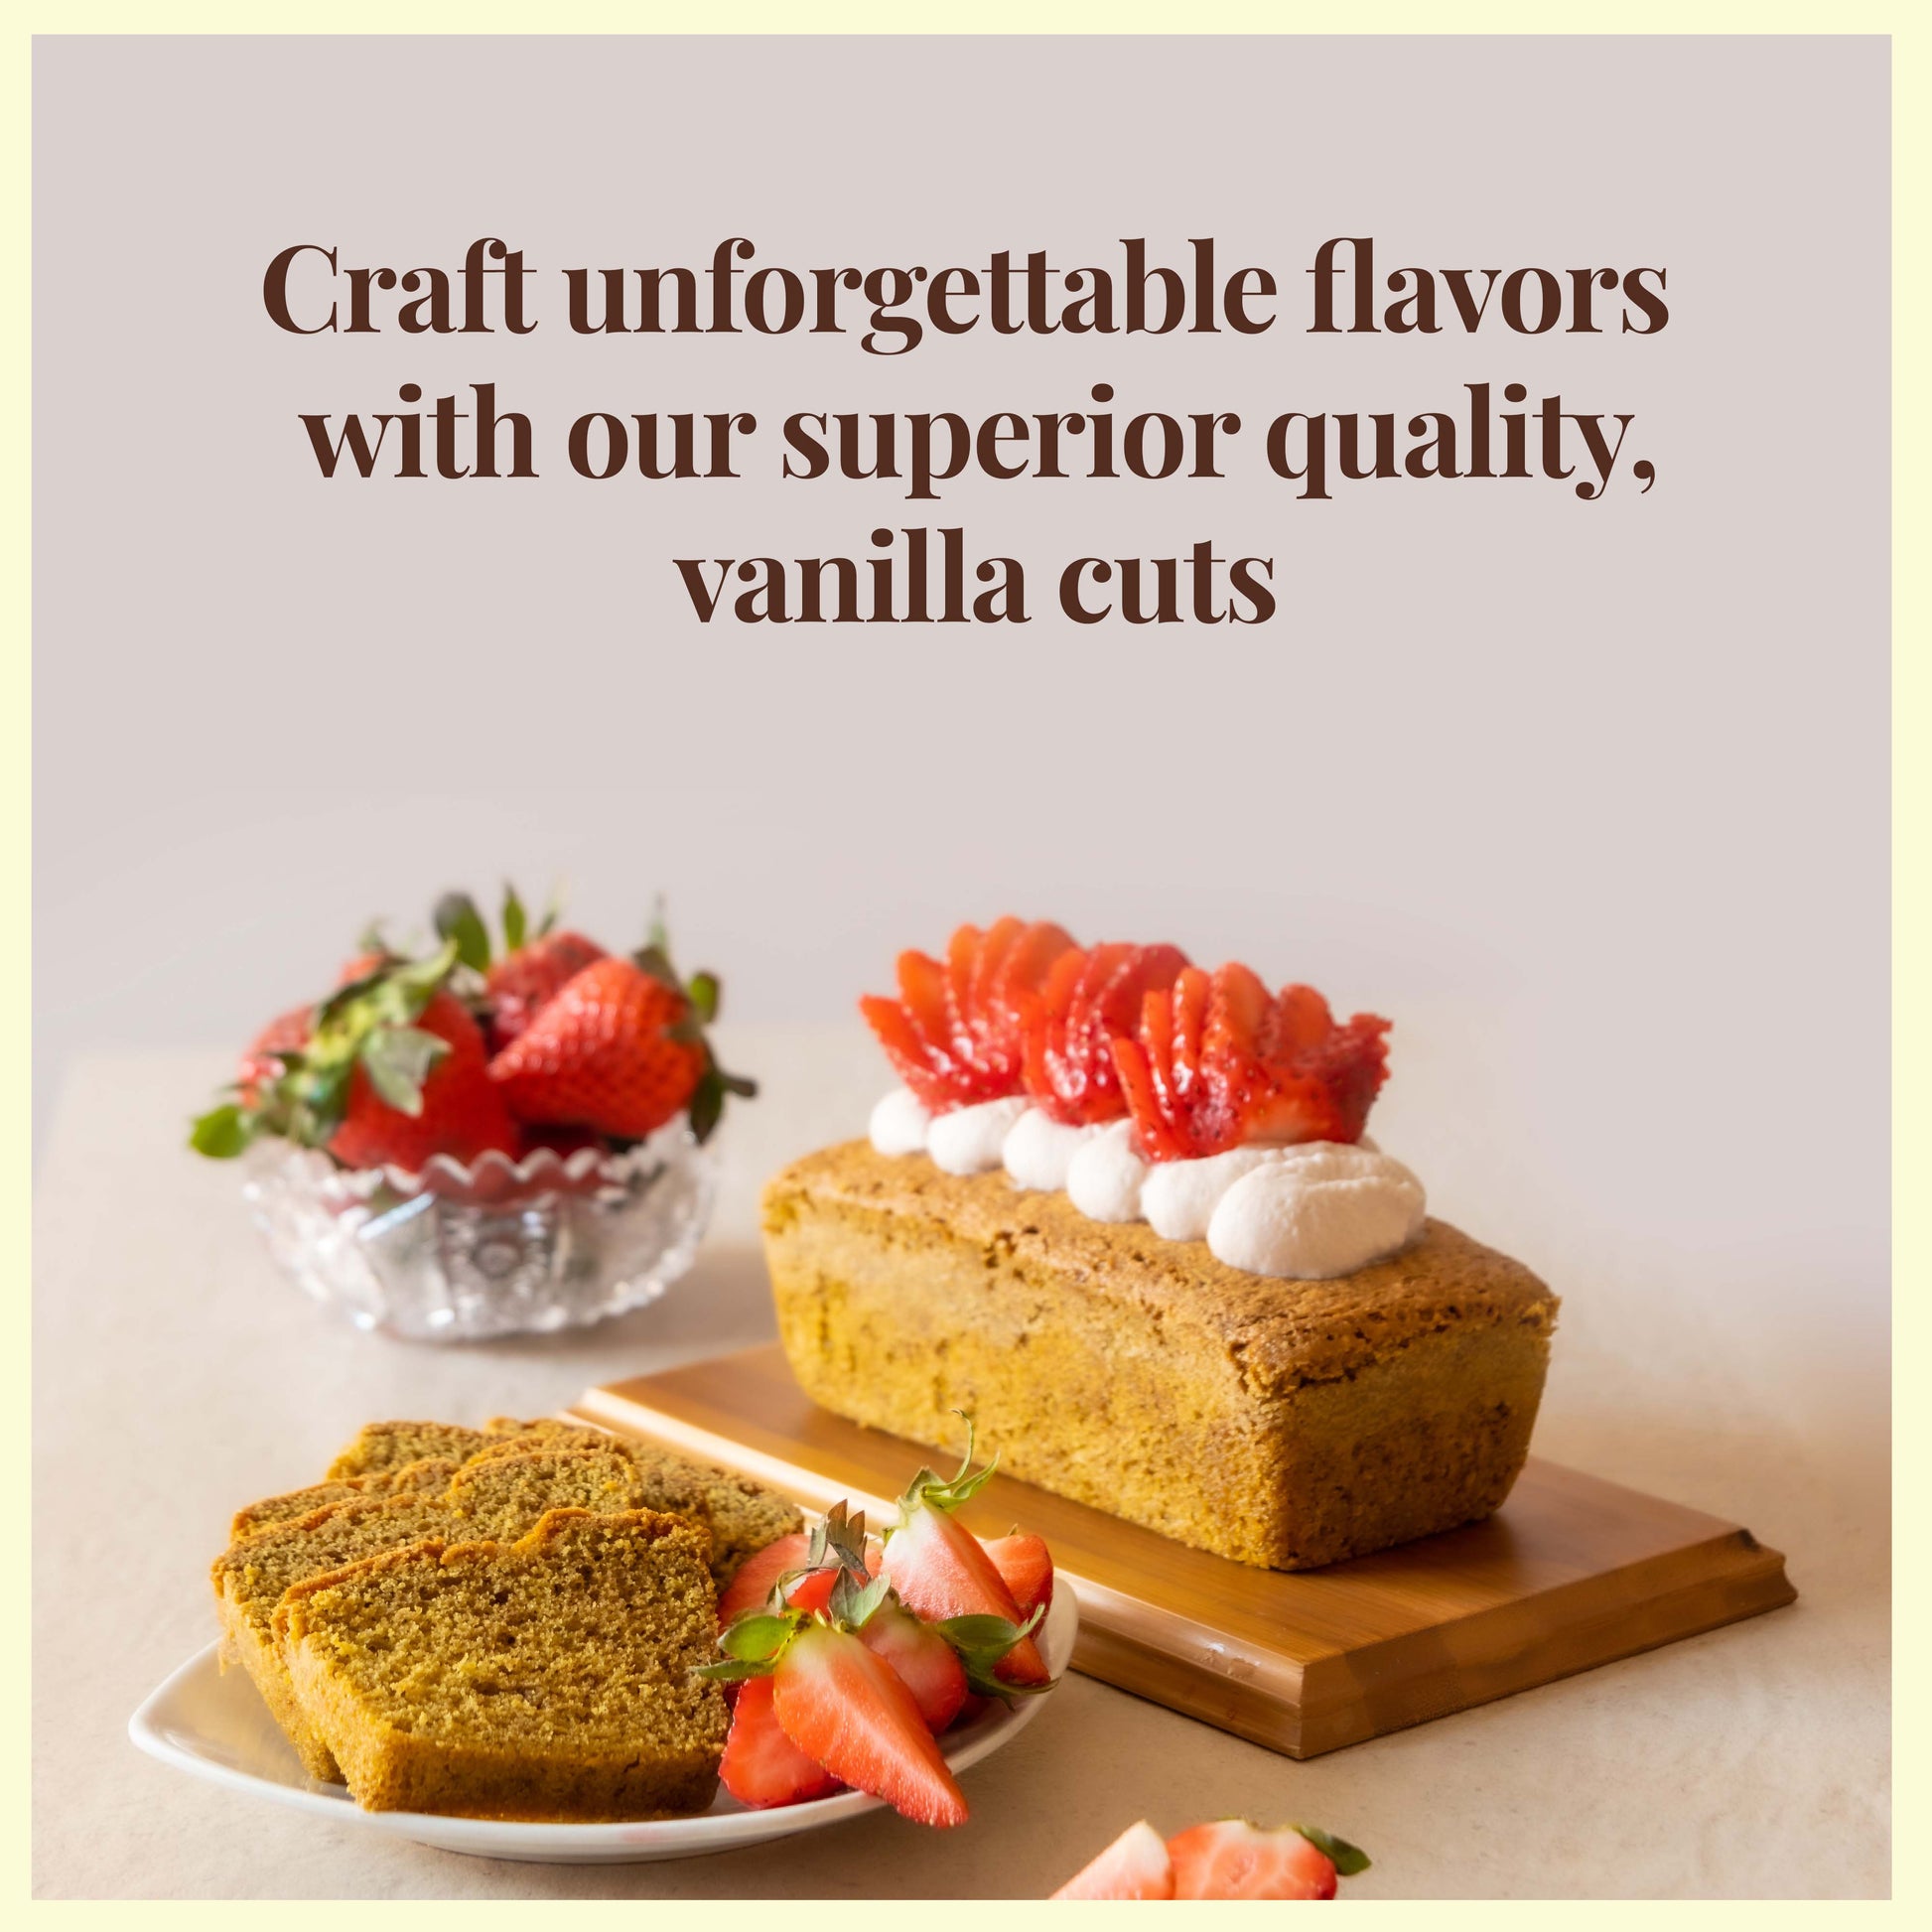 Exquisite Vanilla Bean Fragments - Carft unforgettable flavors with our superior quality, vanilla cuts Richly Textured Vanilla Bean Pieces 